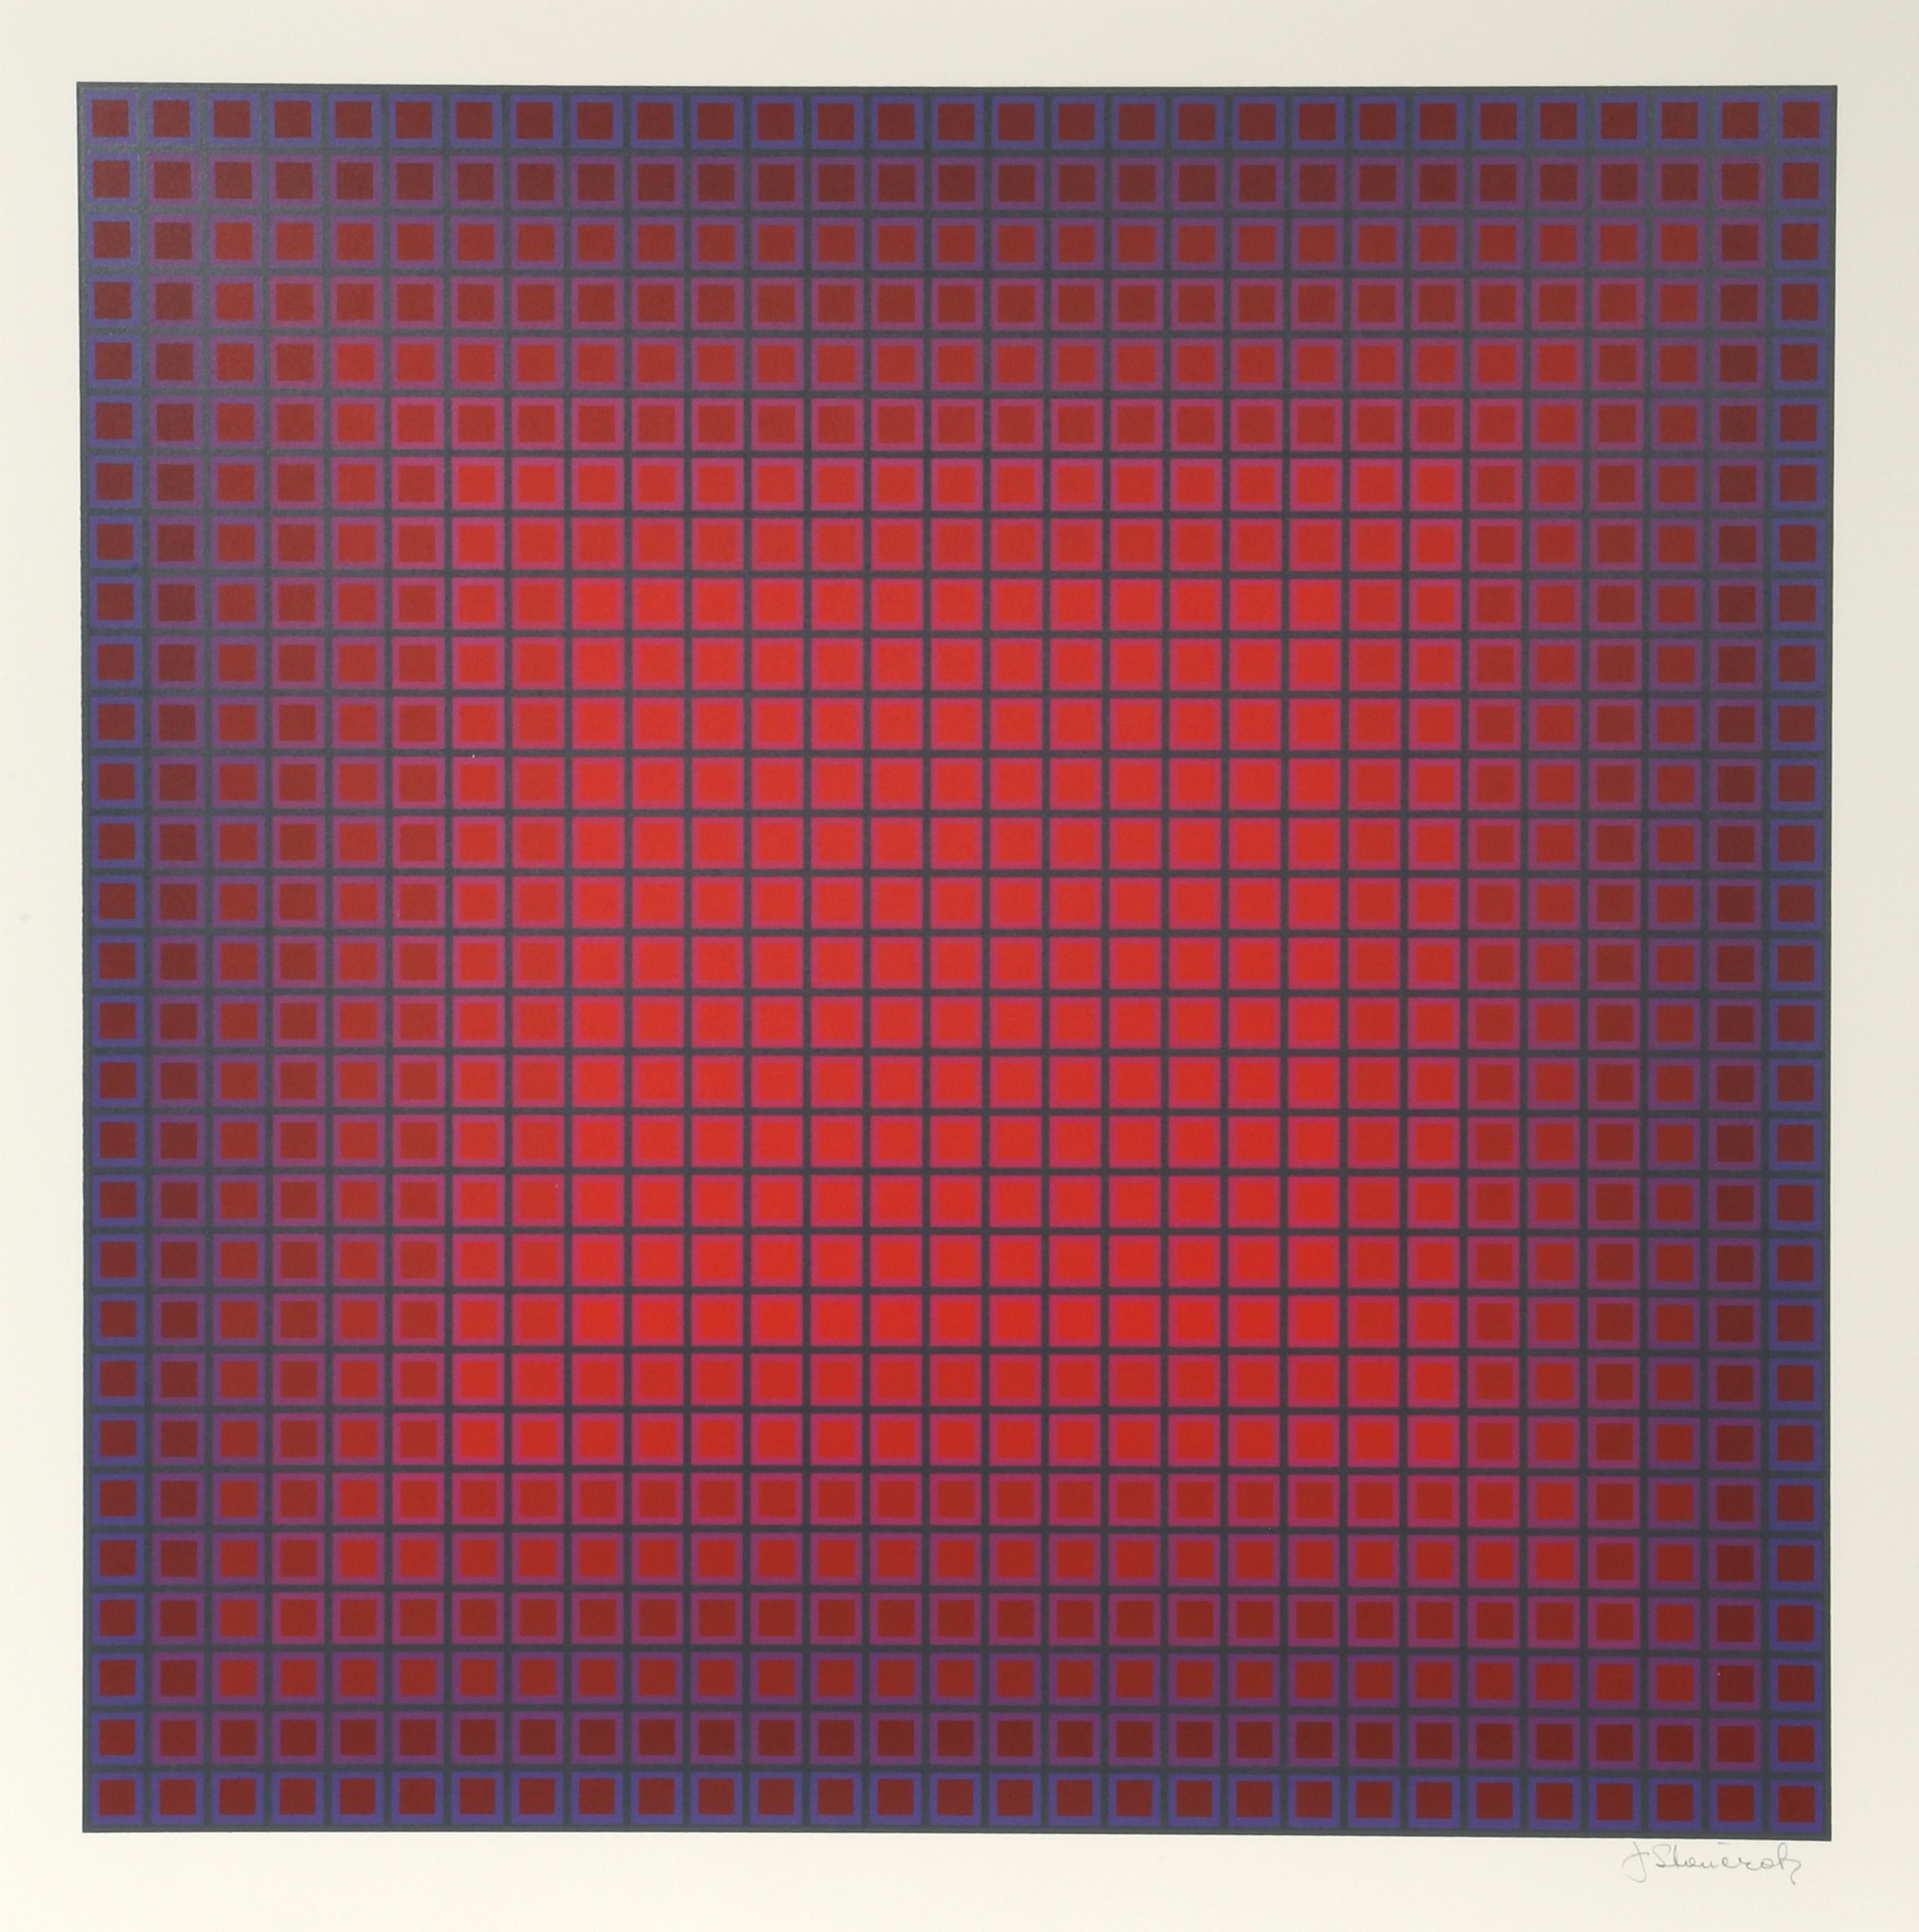 A colorful OP Art silkscreen by Poland-born American OP Artist, Julian Stanczak.  

Artist: Julian Stanczak, American (1928 - 2017)
Title: Compounded Red
Year: 1981
Medium: Screenprint, signed and numbered in pencil
Edition:175
Image Size: 23.25 x